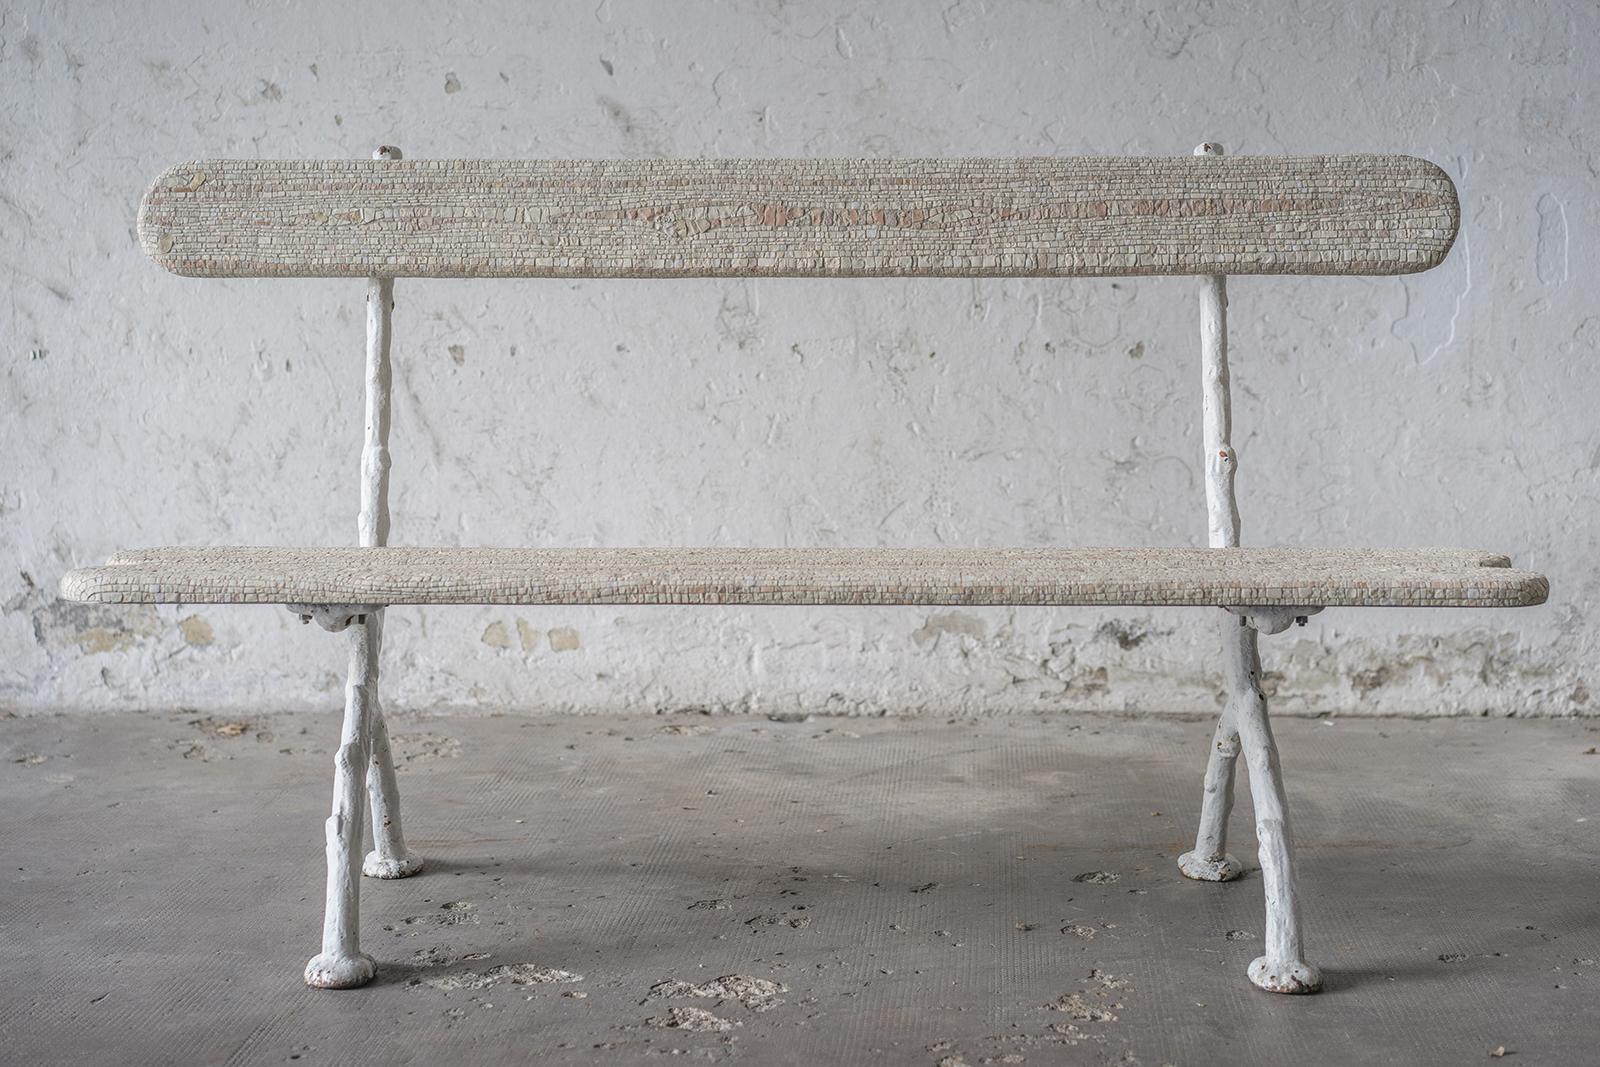 Panchina Bianca Antique bench by Yukiko Nagai.
Dimensions: D55 x W157 x H90 cm.
Material: Iron , Marble, Natural stone, Cement, Stucco
Weight: 80 kg. 

A vintage white bench, made out of iron and wood, has been used as the subject for a new